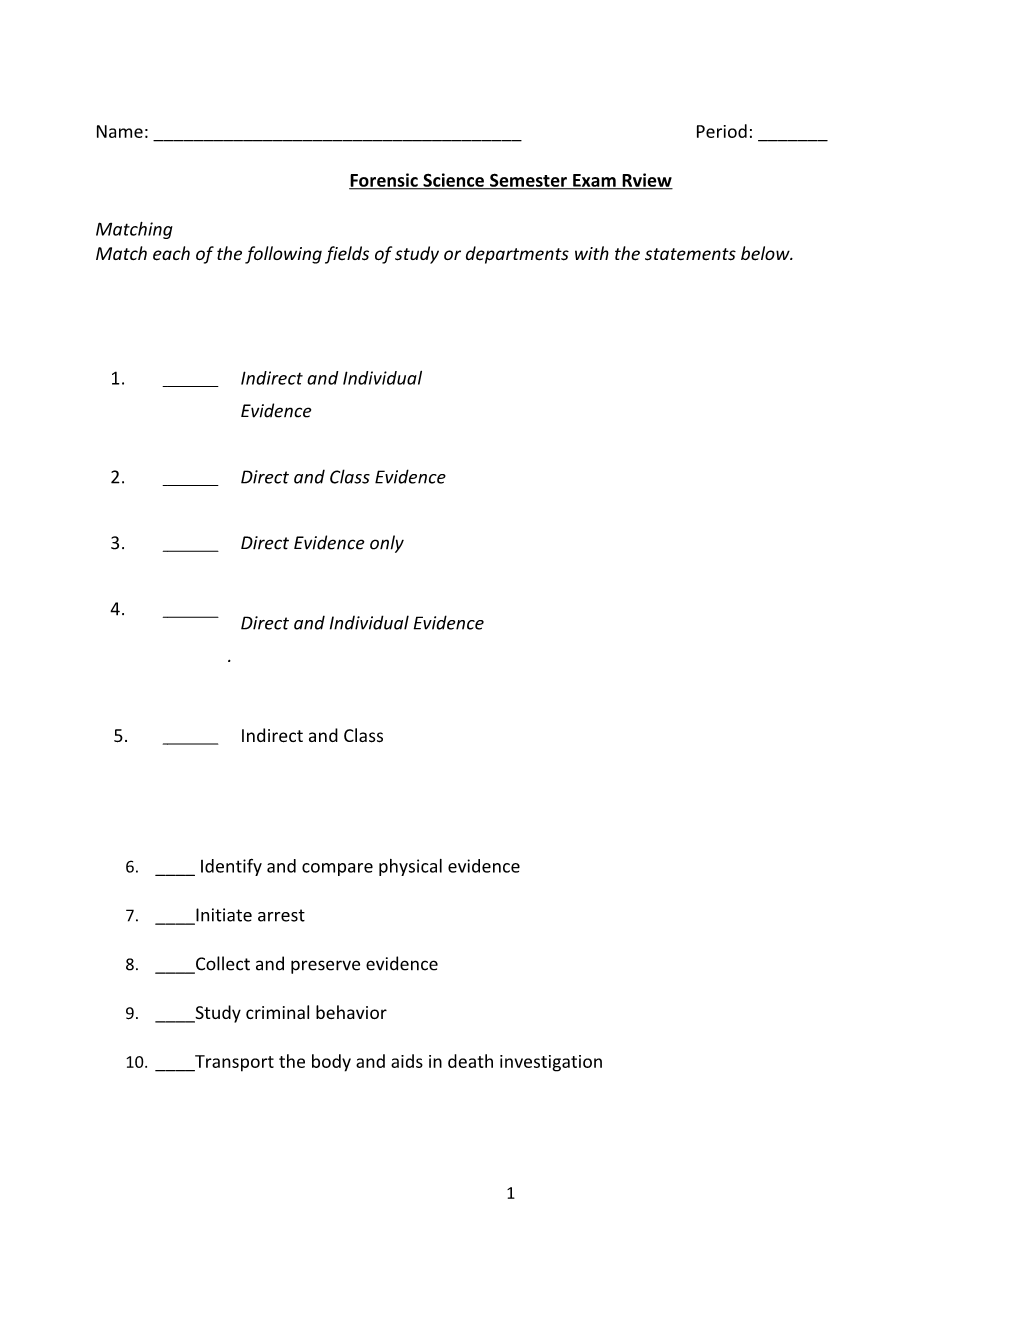 Forensic Science Semester Exam Rview